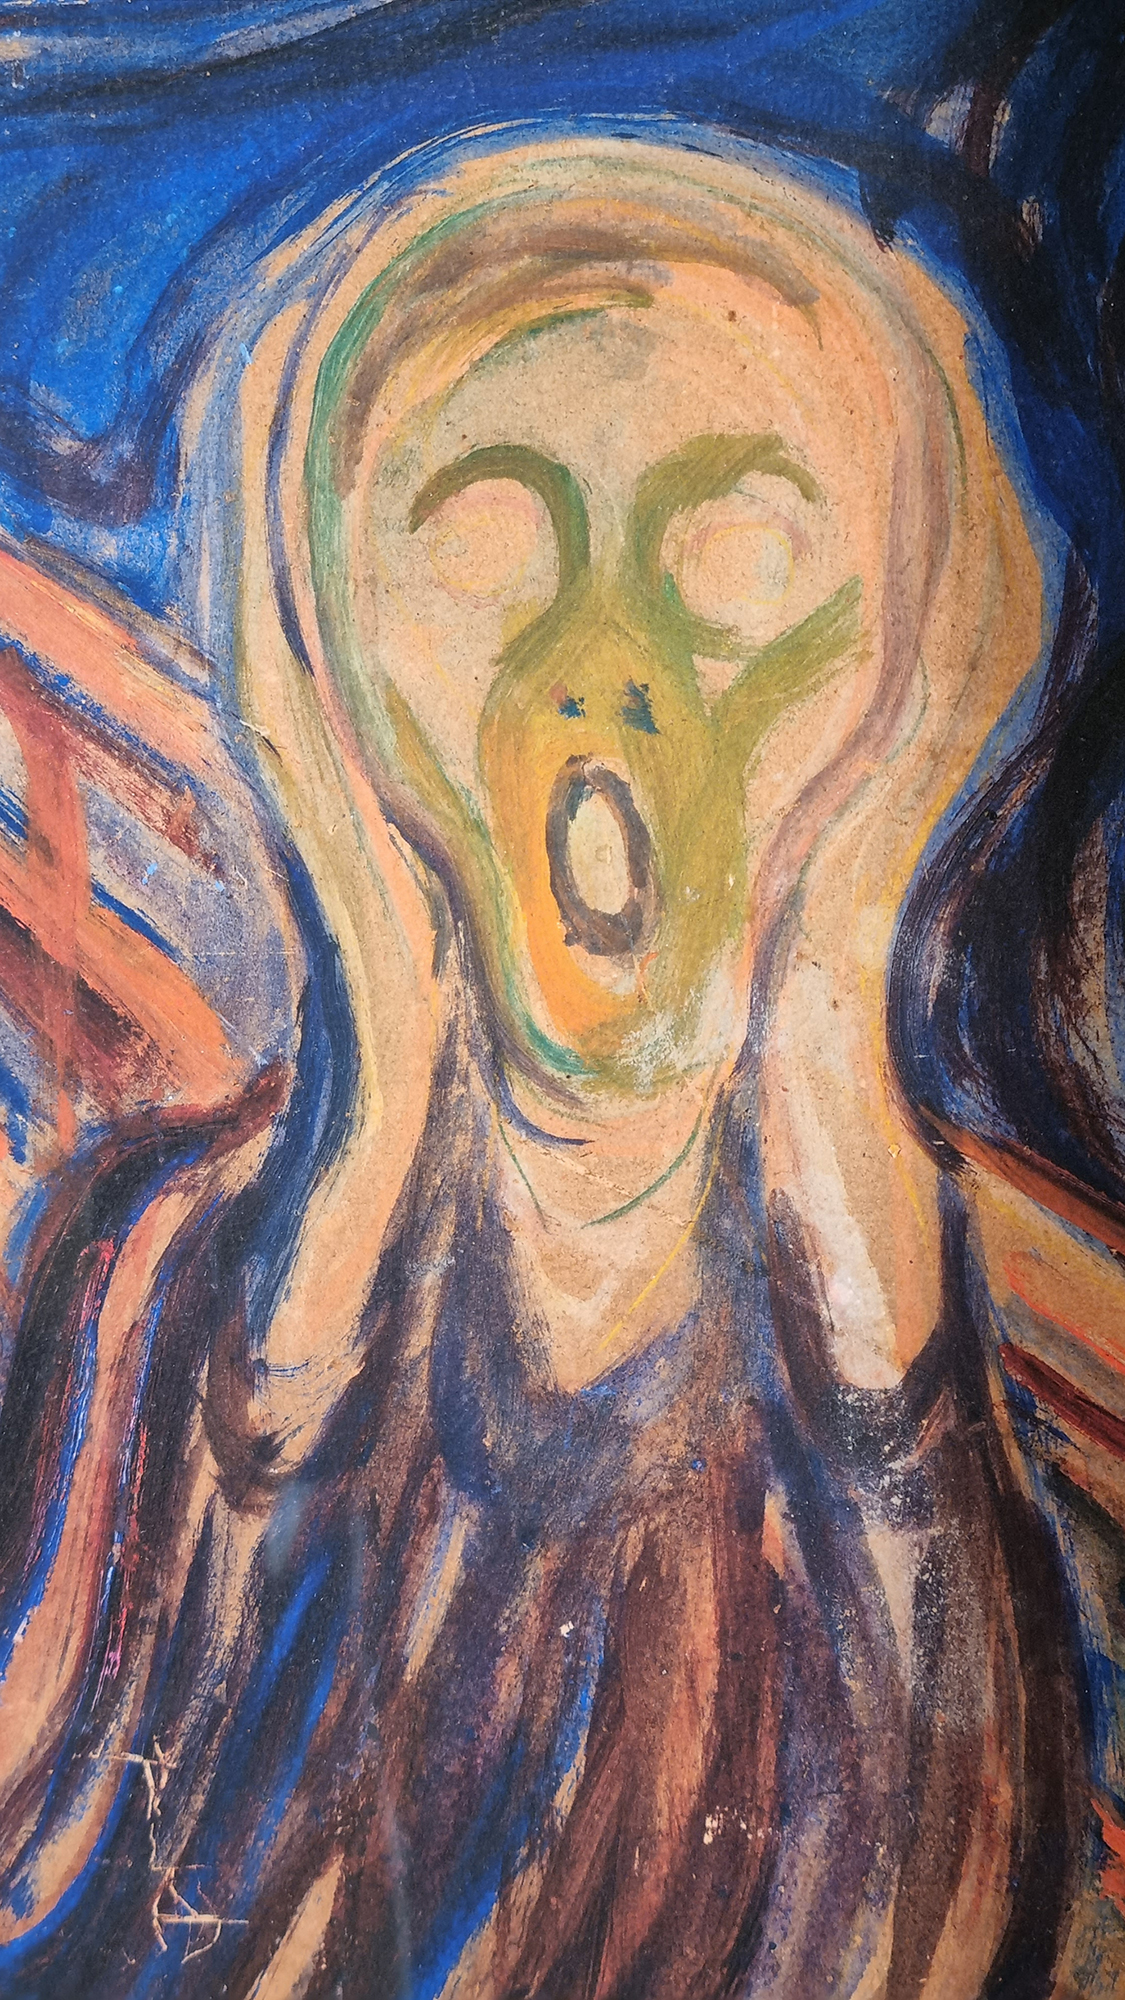 Rare Limited Edition Edvard Munch "The Scream" - Image 6 of 7